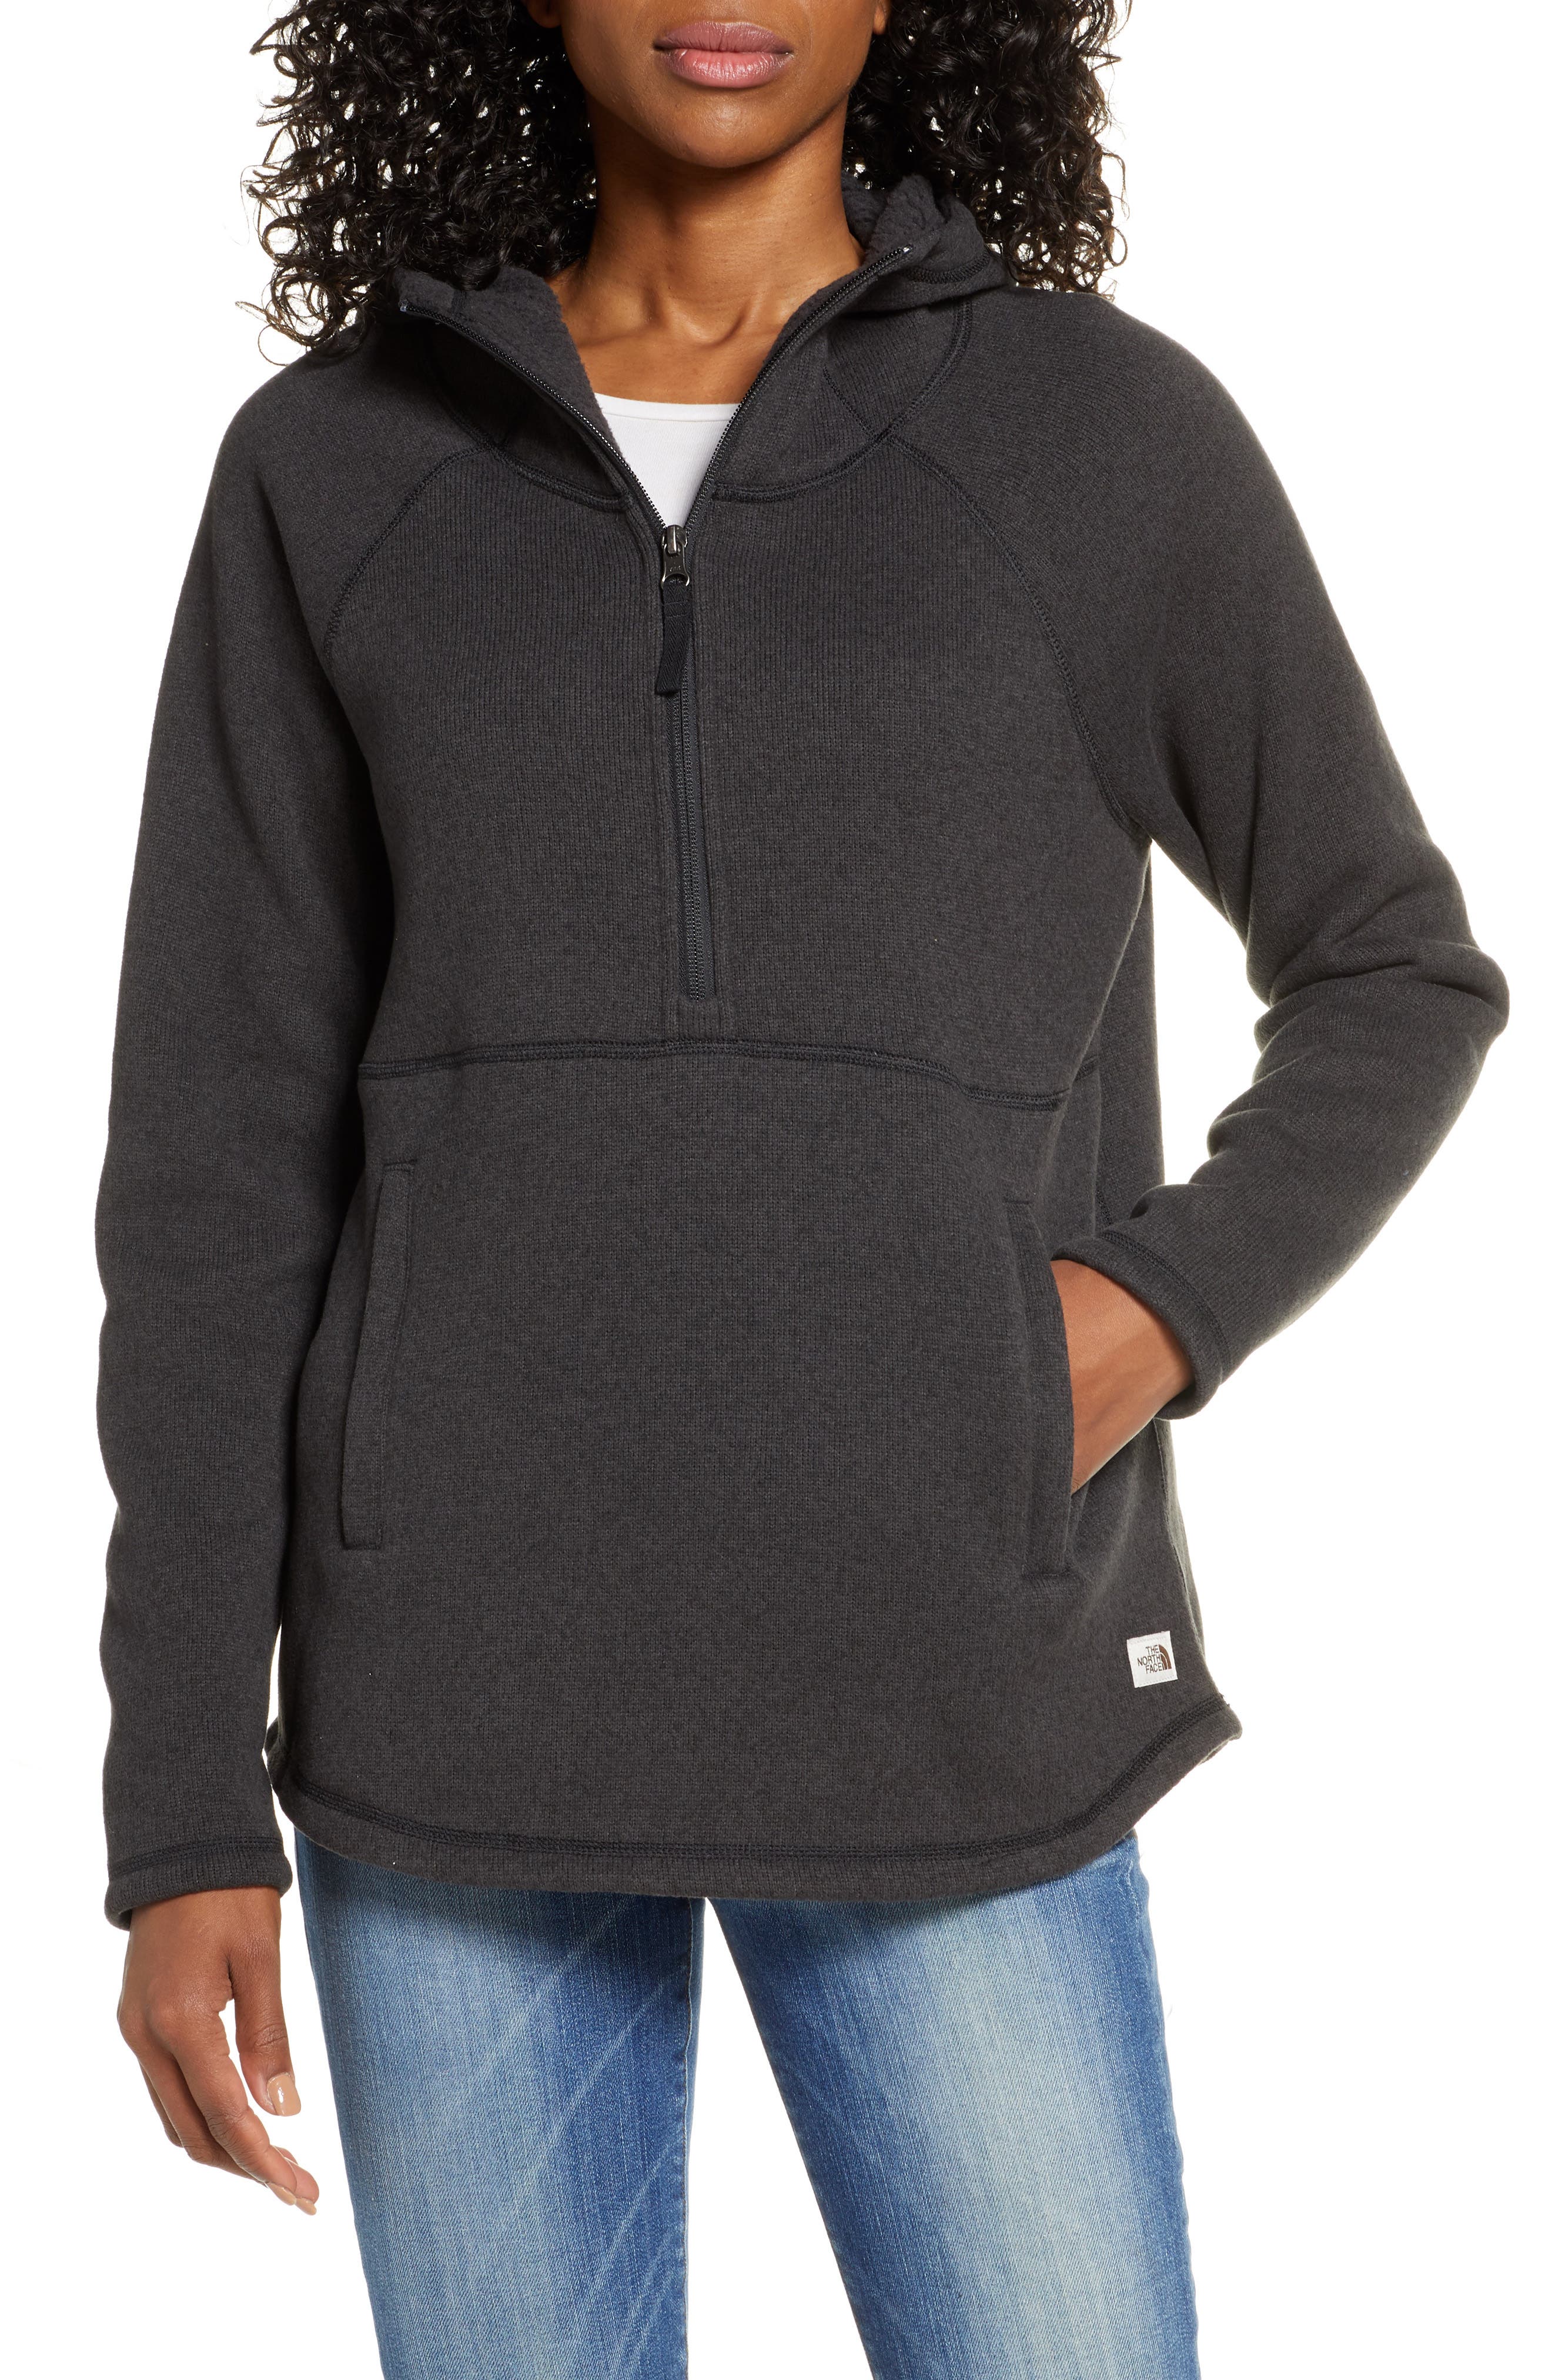 women's crescent hooded pullover